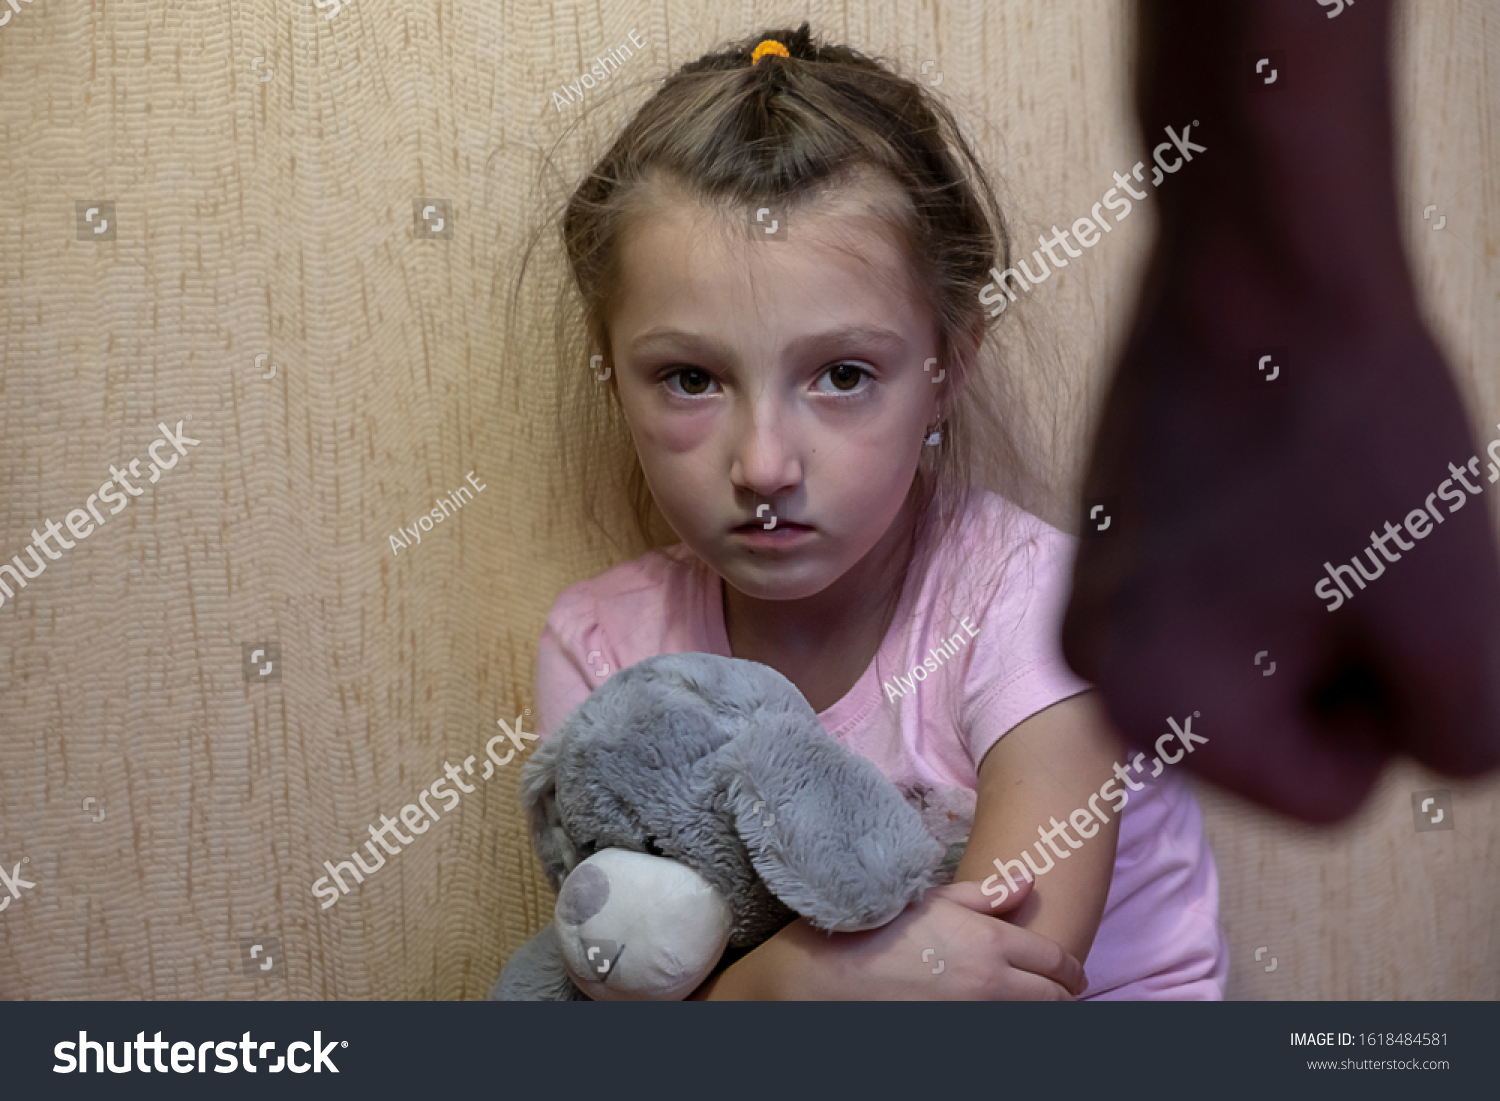 stock-photo-domestic-violence-concept-home-violence-girl-sitting-alone-leaning-on-the-wall-with-the-father-1618484581.jpg